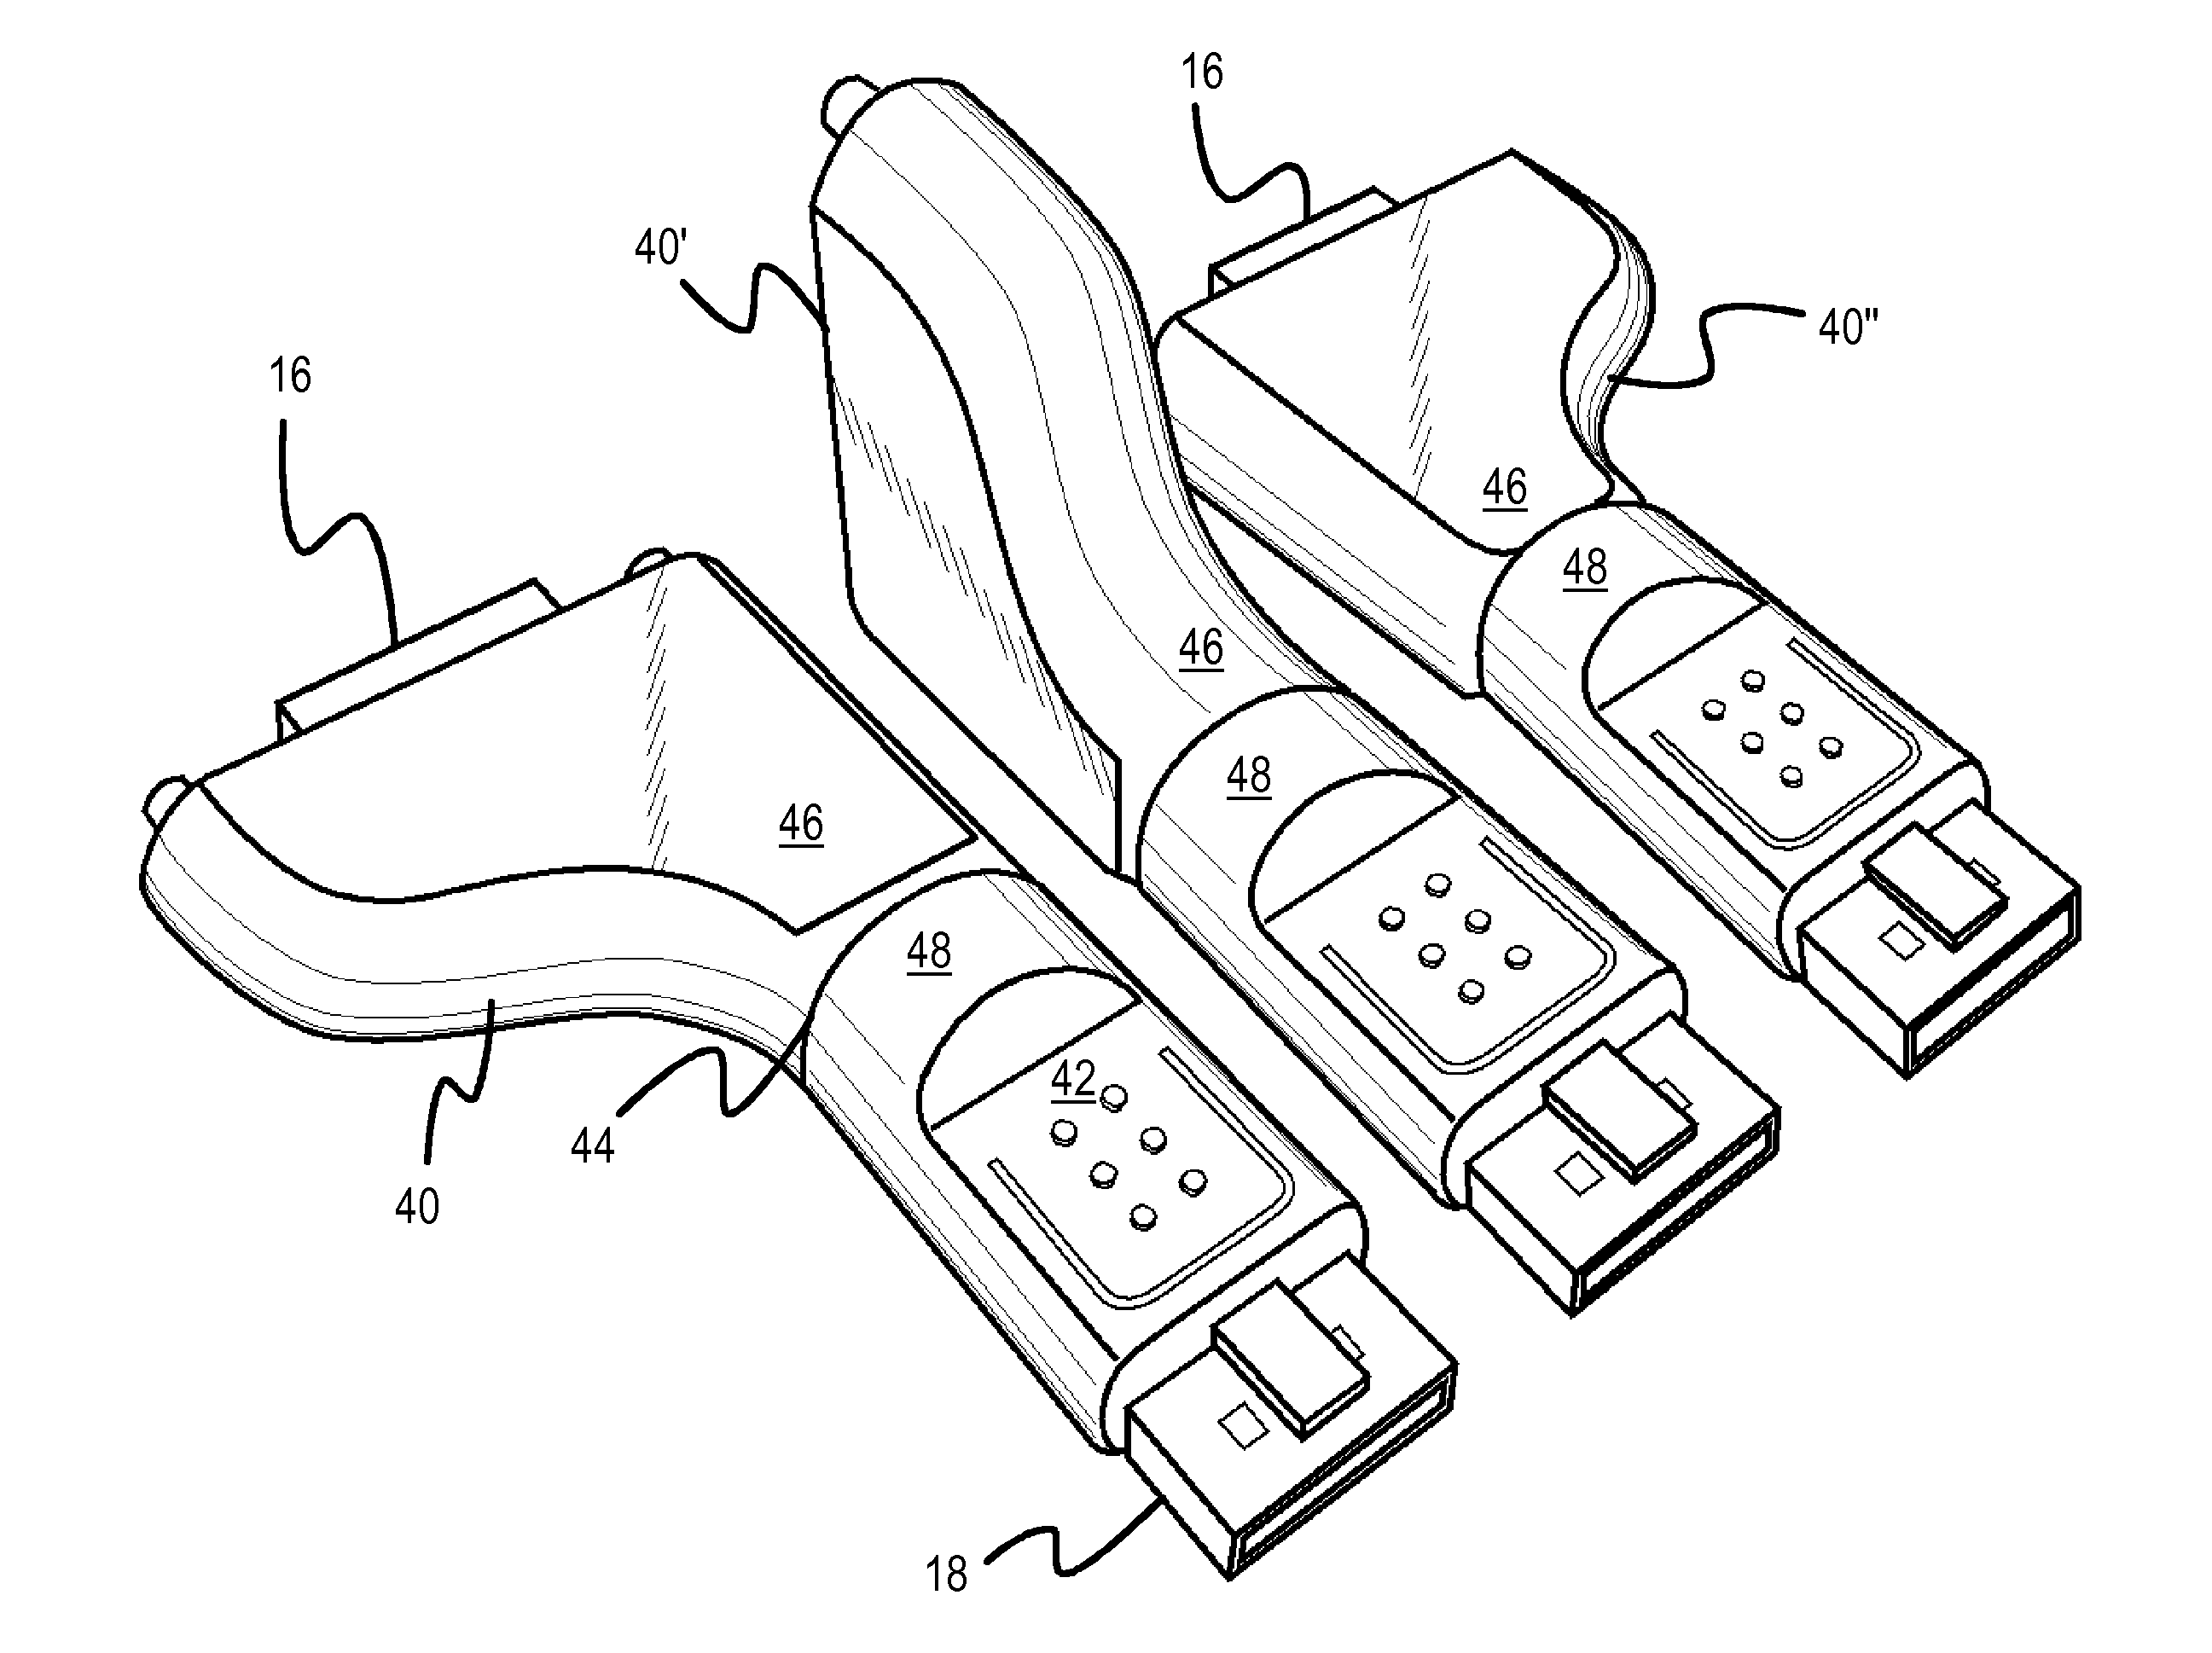 Swiveling offset adapter dongle for reducing blockage of closely-spaced video connectors